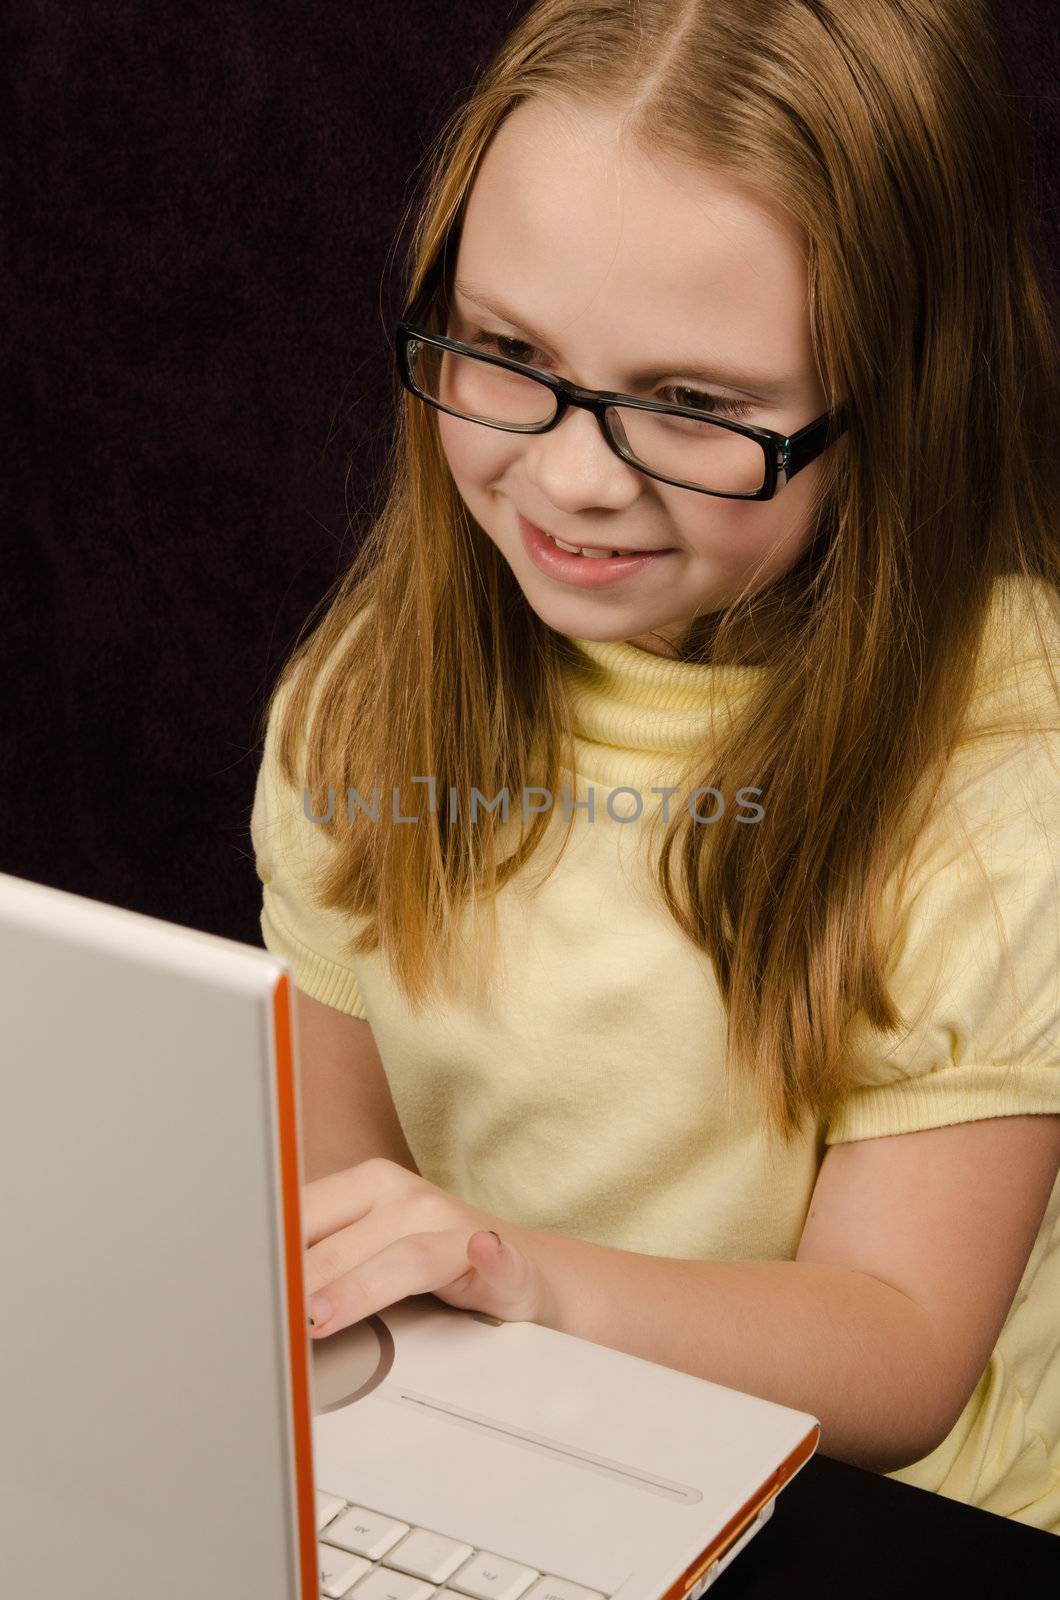 Little girl  looks at laptop computer and having fun